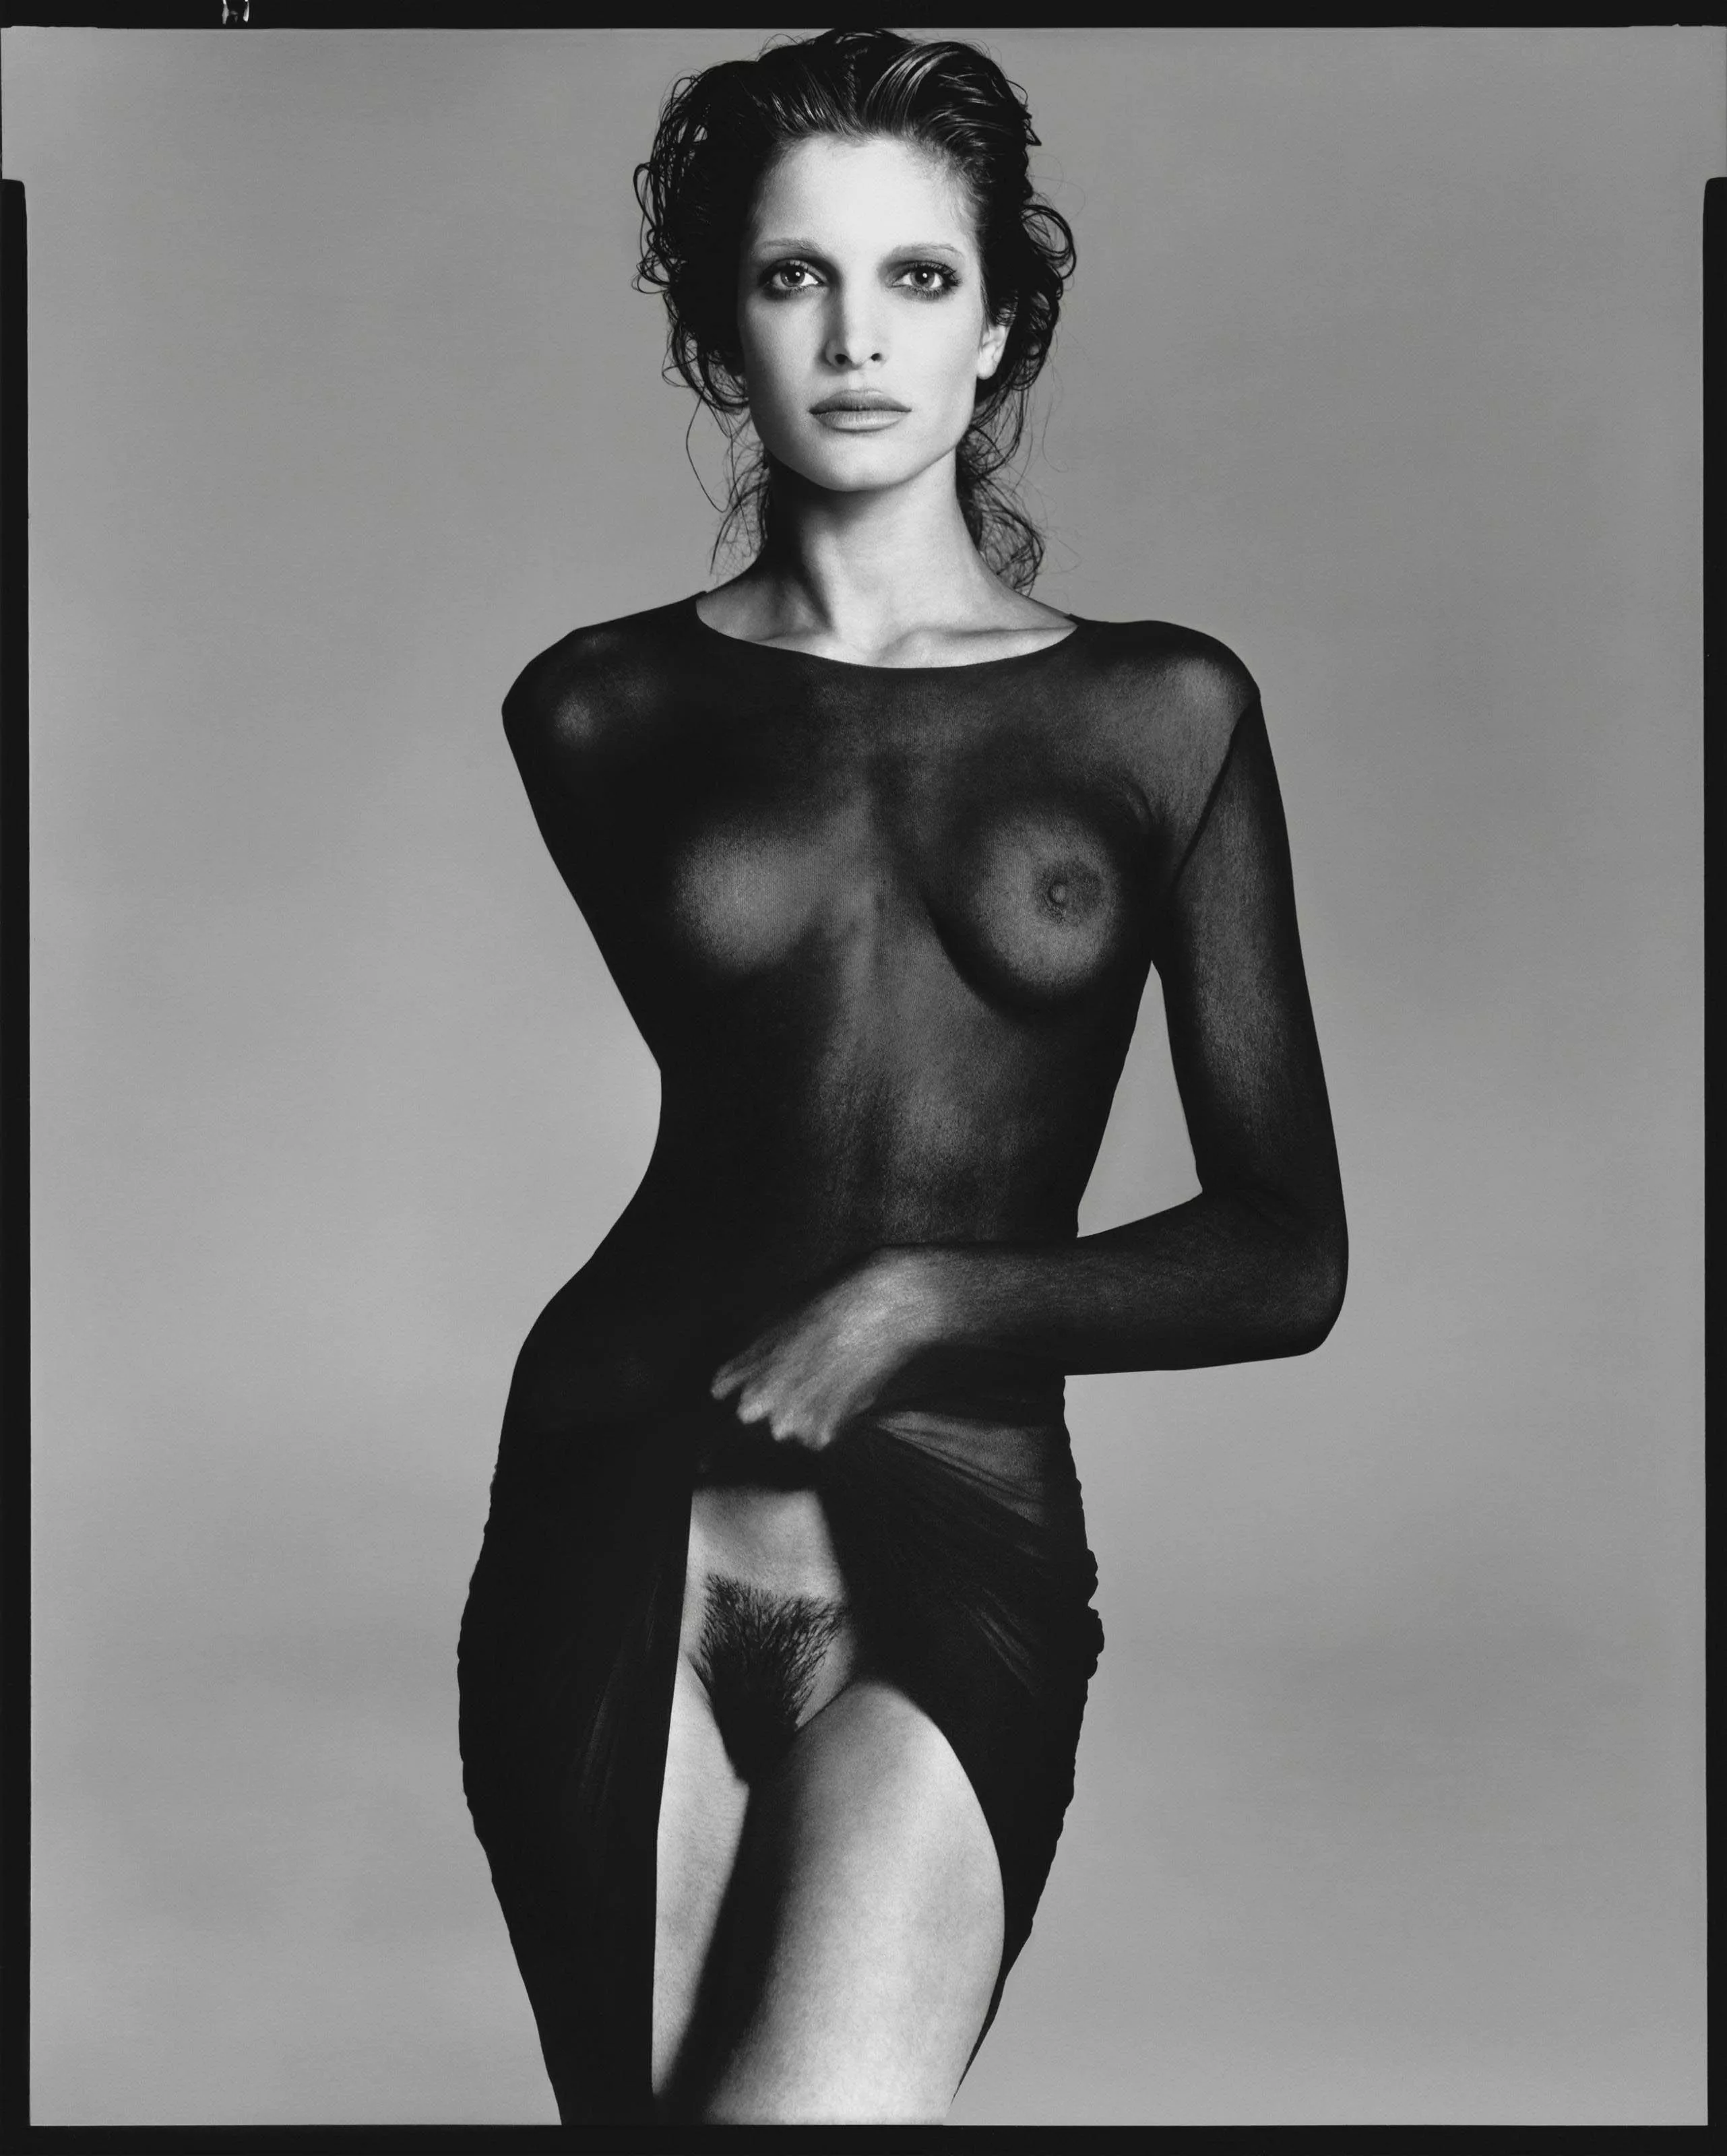 Stephanie Seymour fully naked at Largest Celebrities Archive!